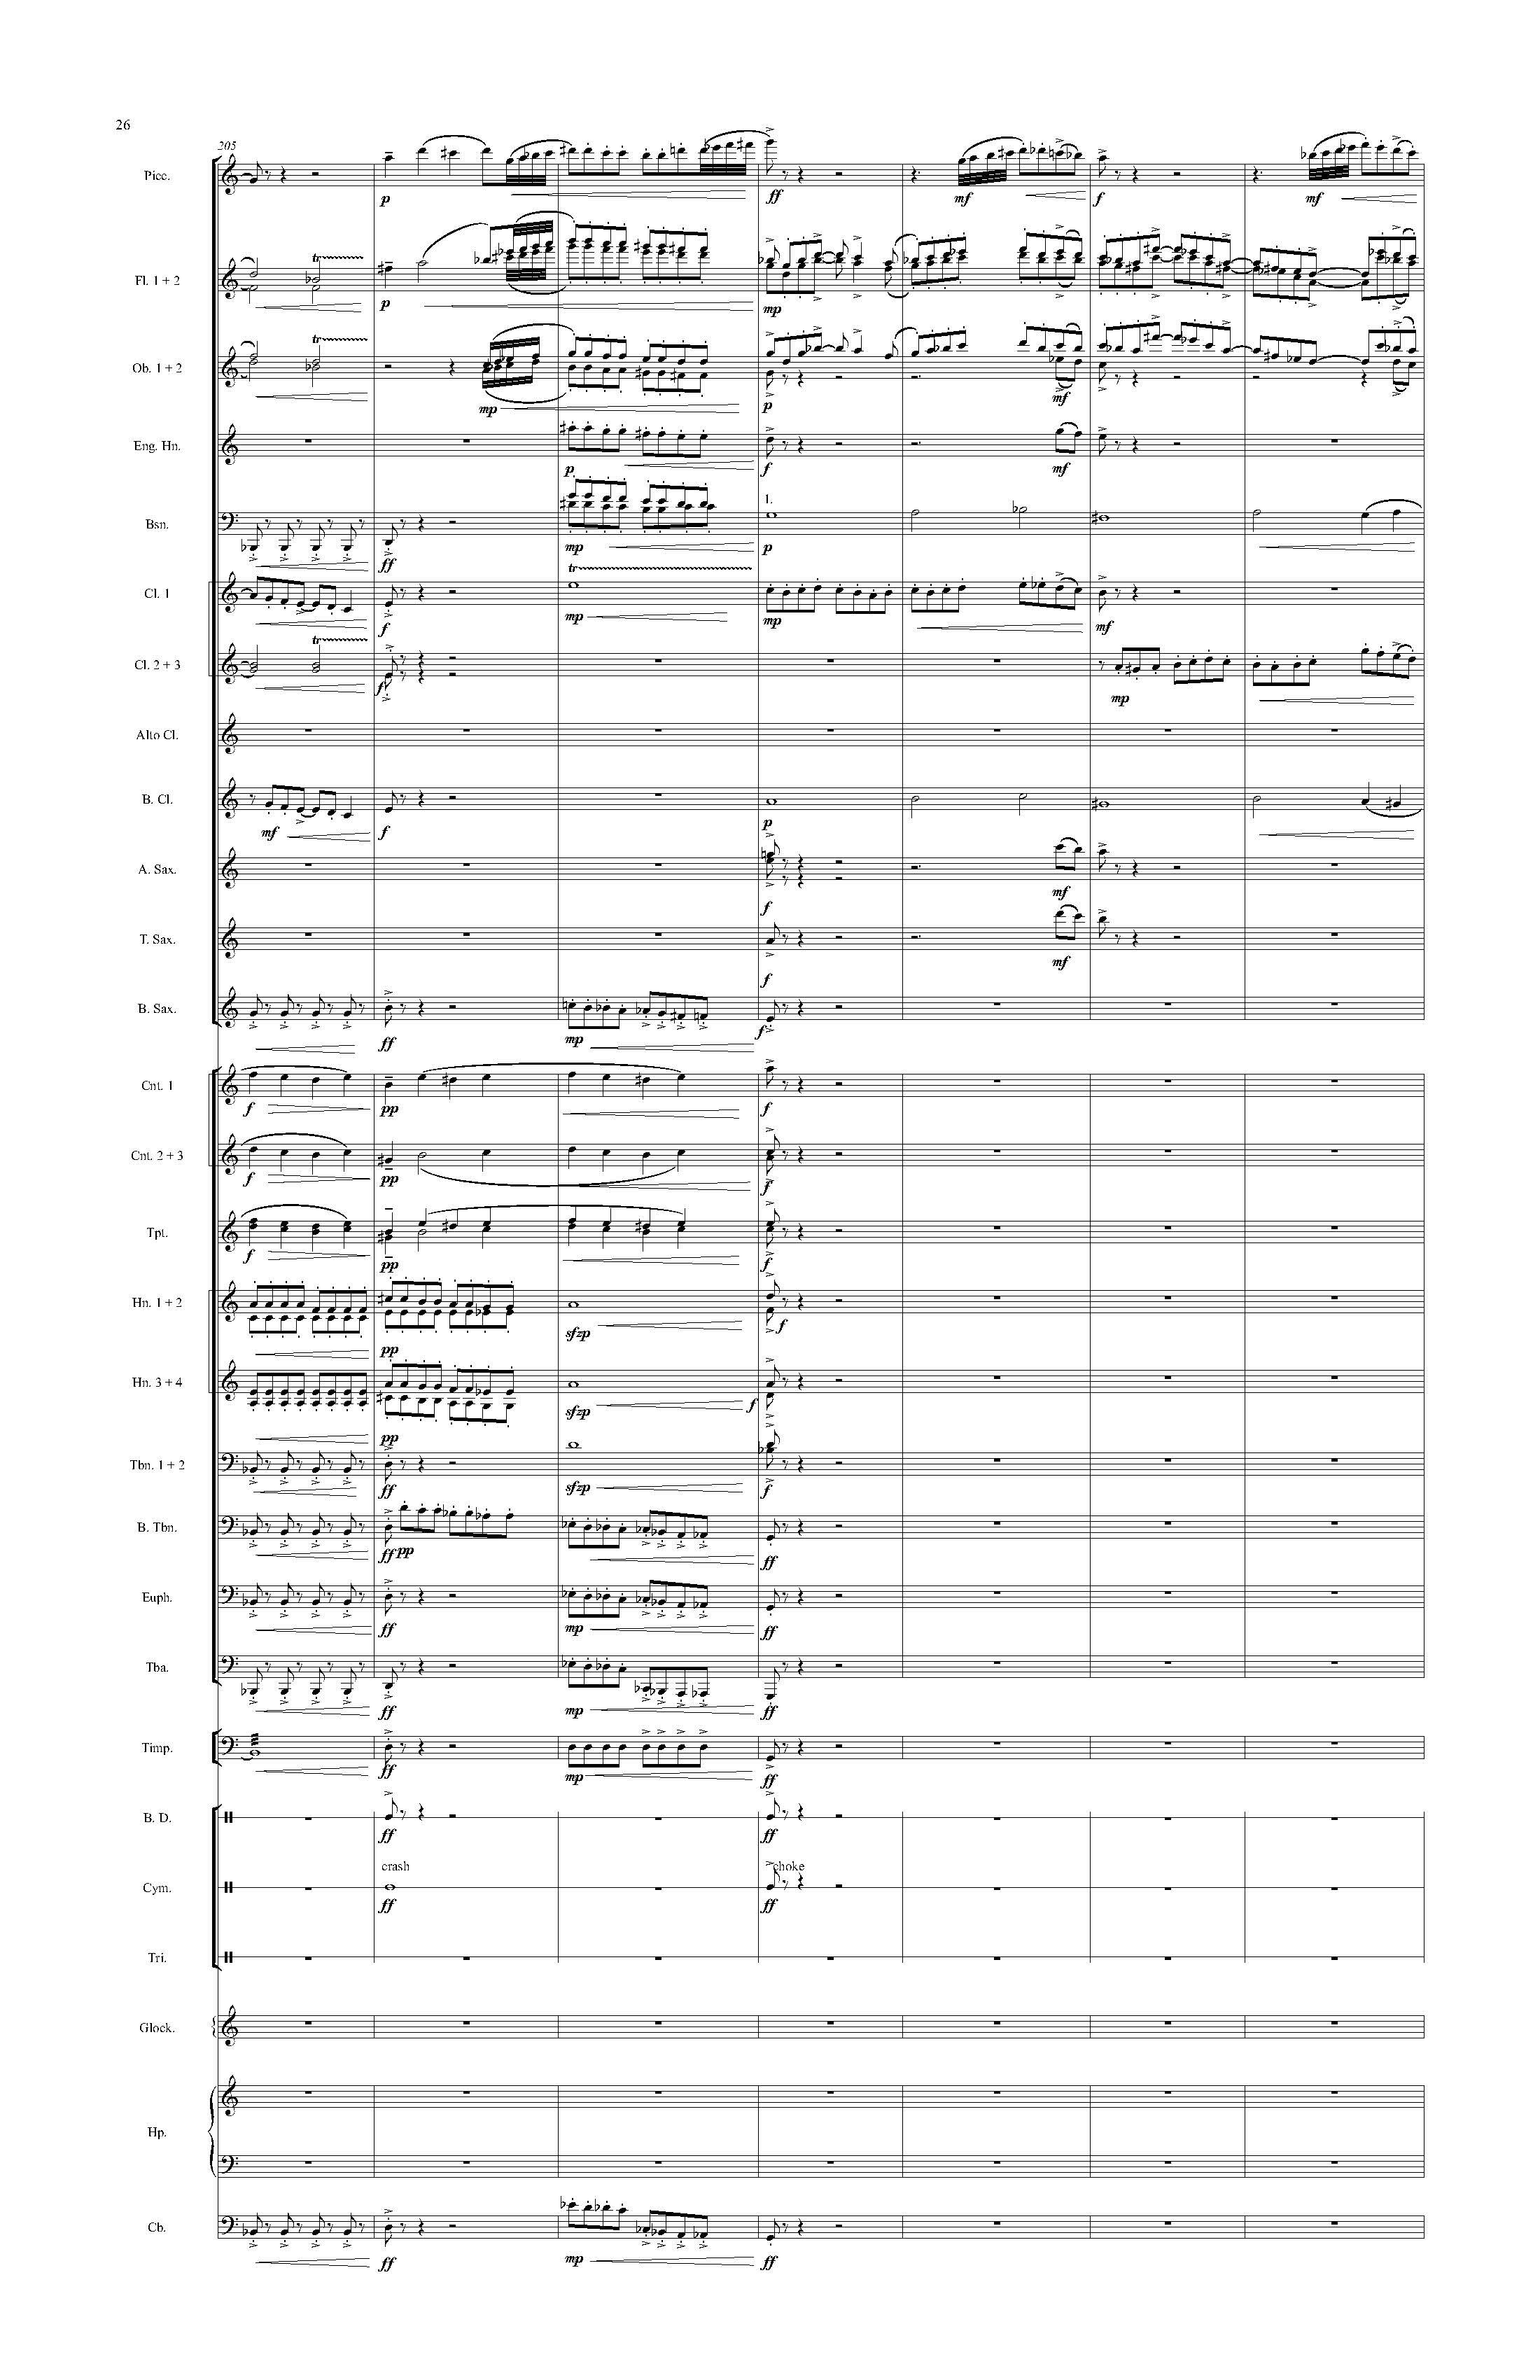 Psyche - Complete Score_Page_32.jpg